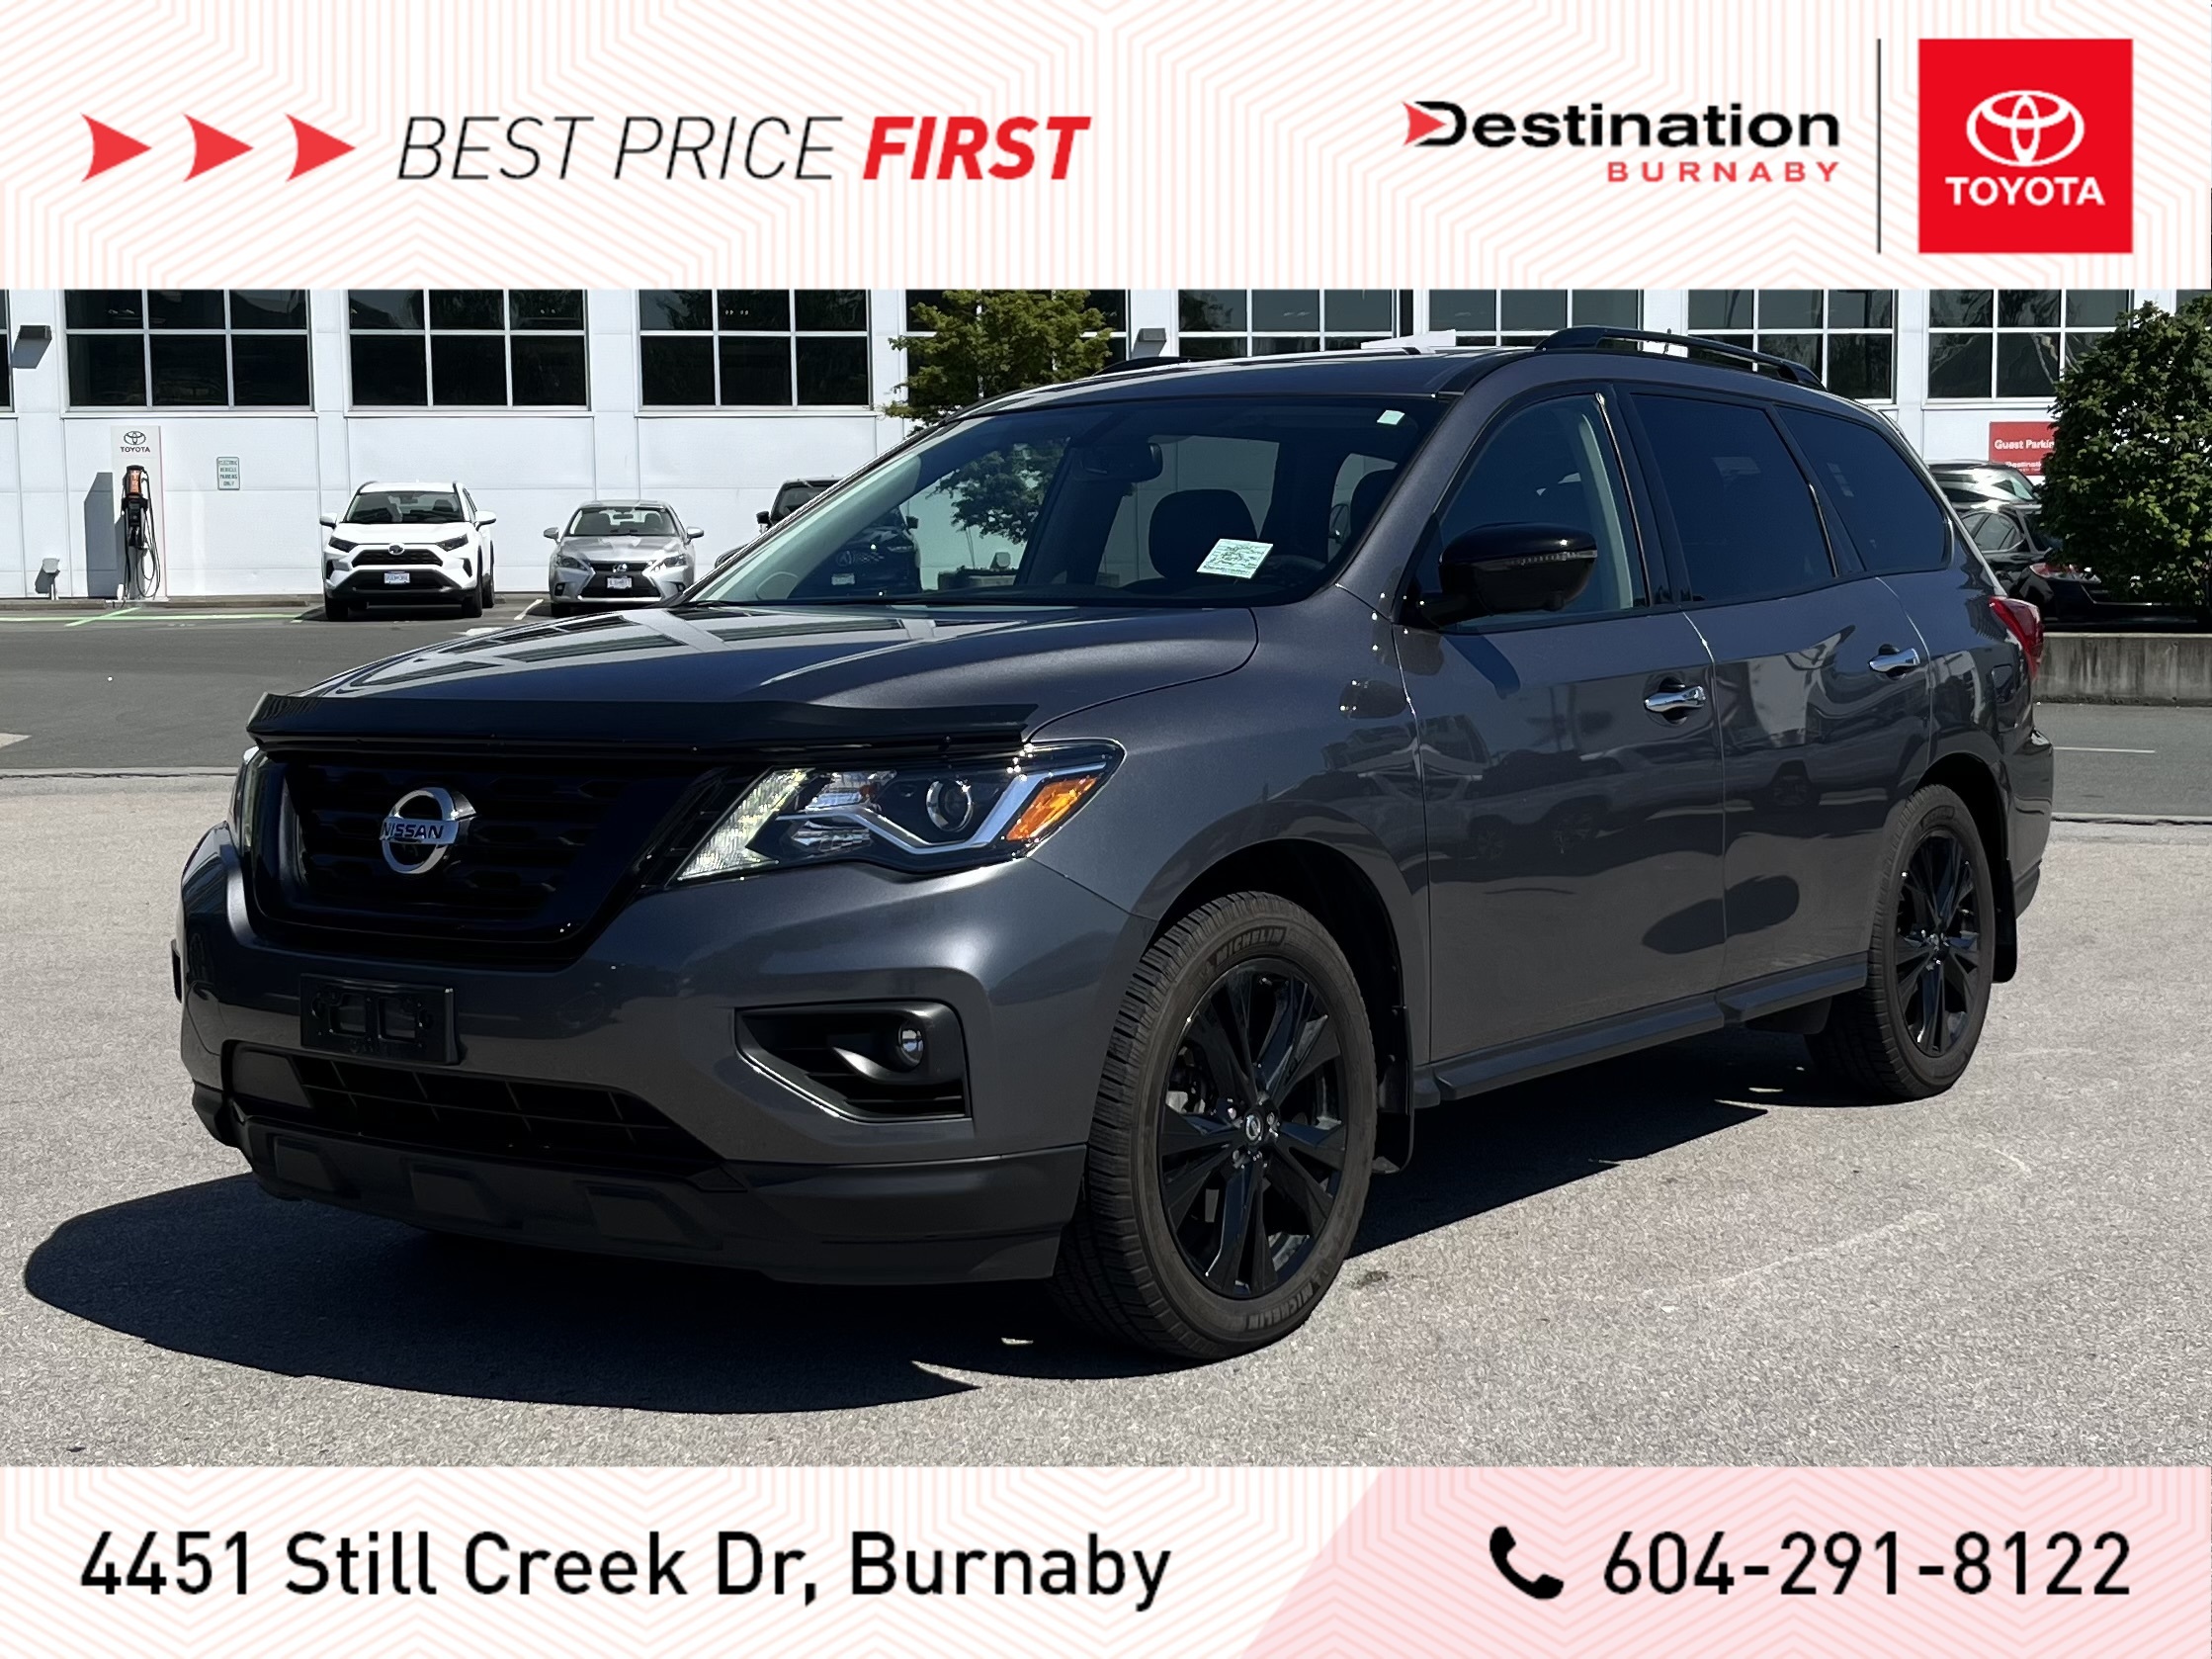 2018 Nissan Pathfinder Midnight, Low Kms, Loaded